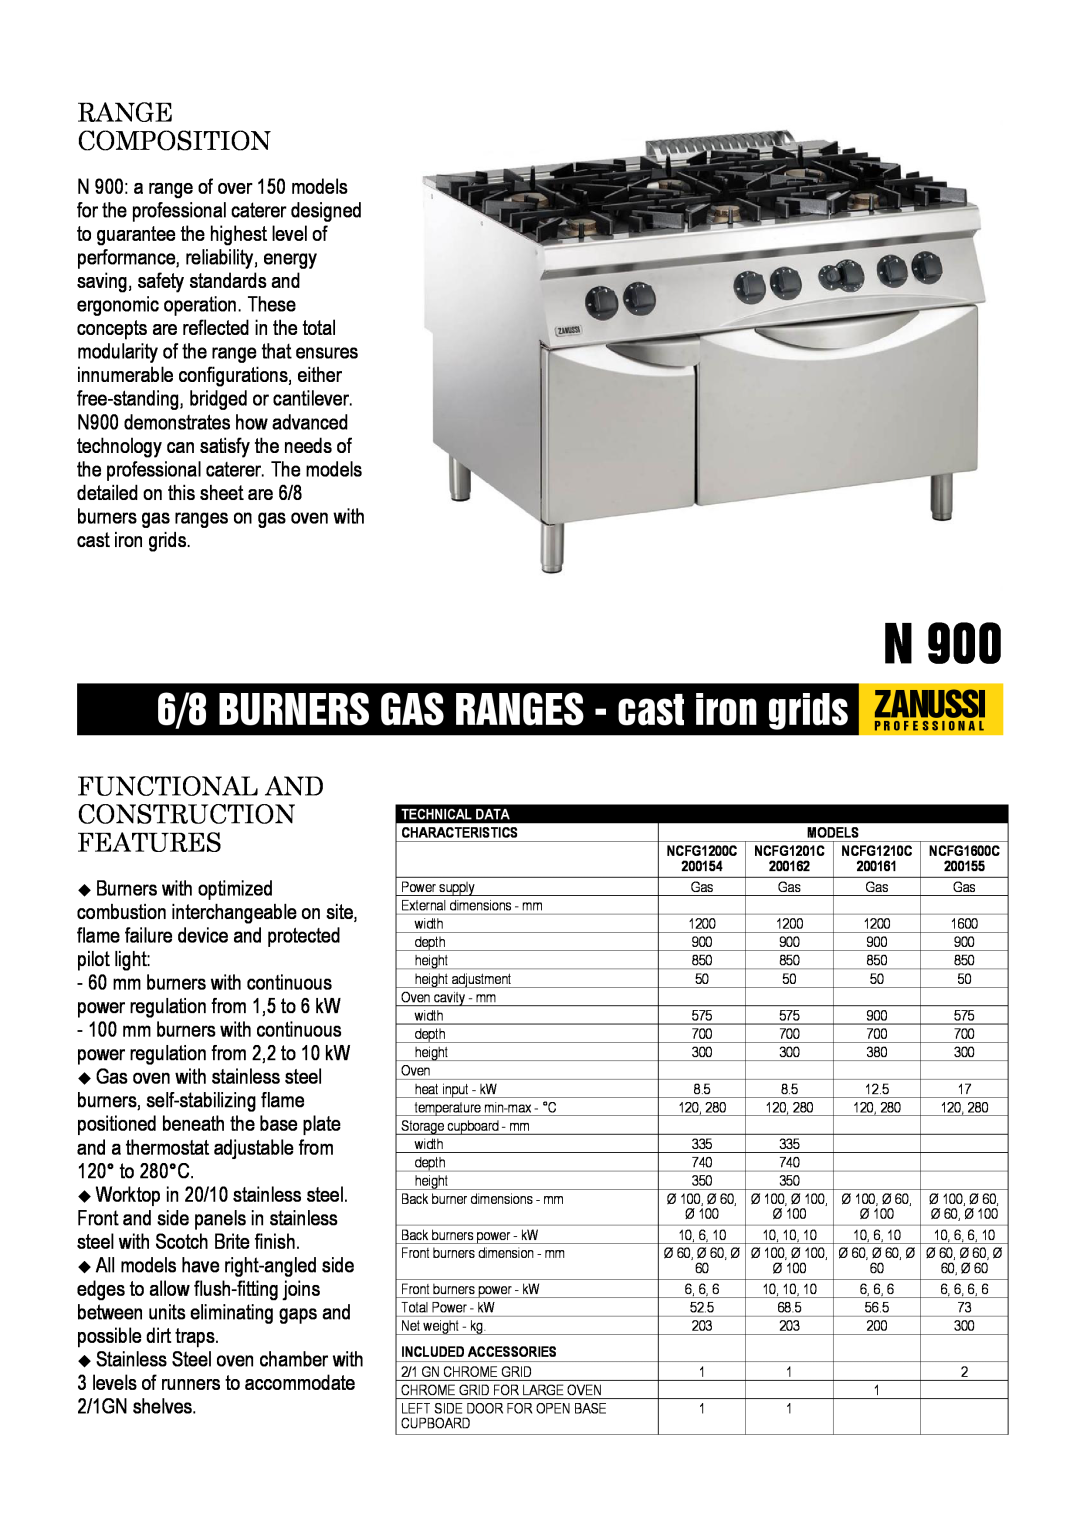 Zanussi NCFG1600C, NCFG1201C dimensions levels of runners to accommodate 2/1GN shelves, Stainless Steel oven chamber with 